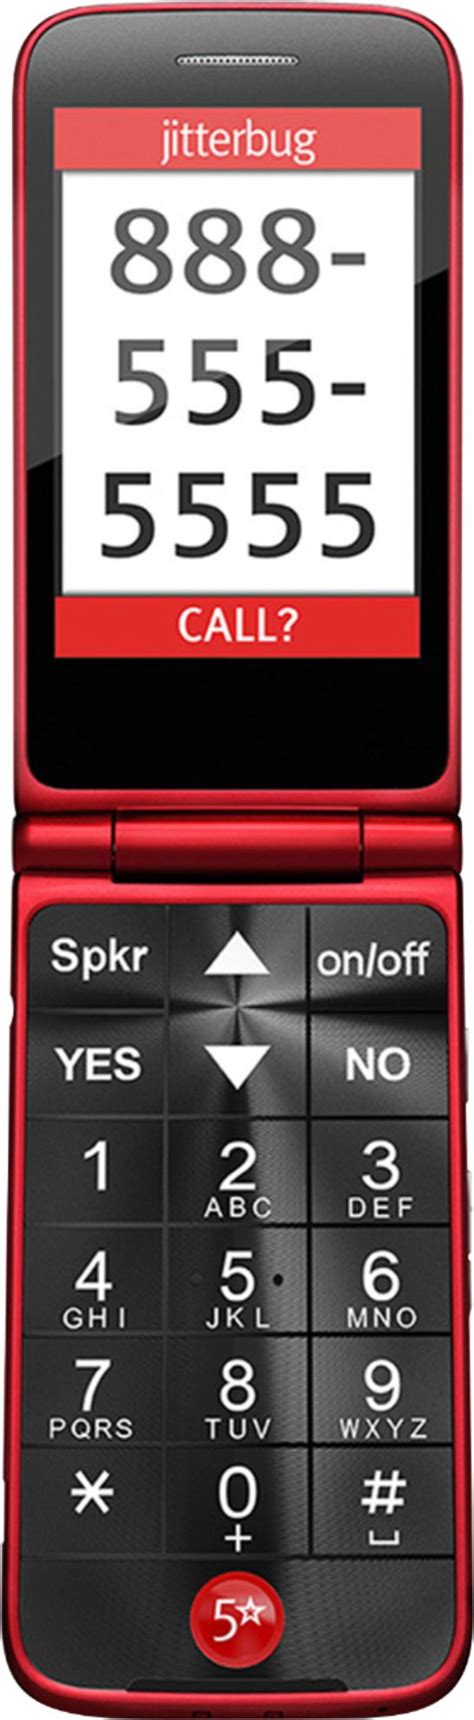 Questions And Answers Greatcall Jitterbug Flip Prepaid Cell Phone For Seniors Red 4043sj6red